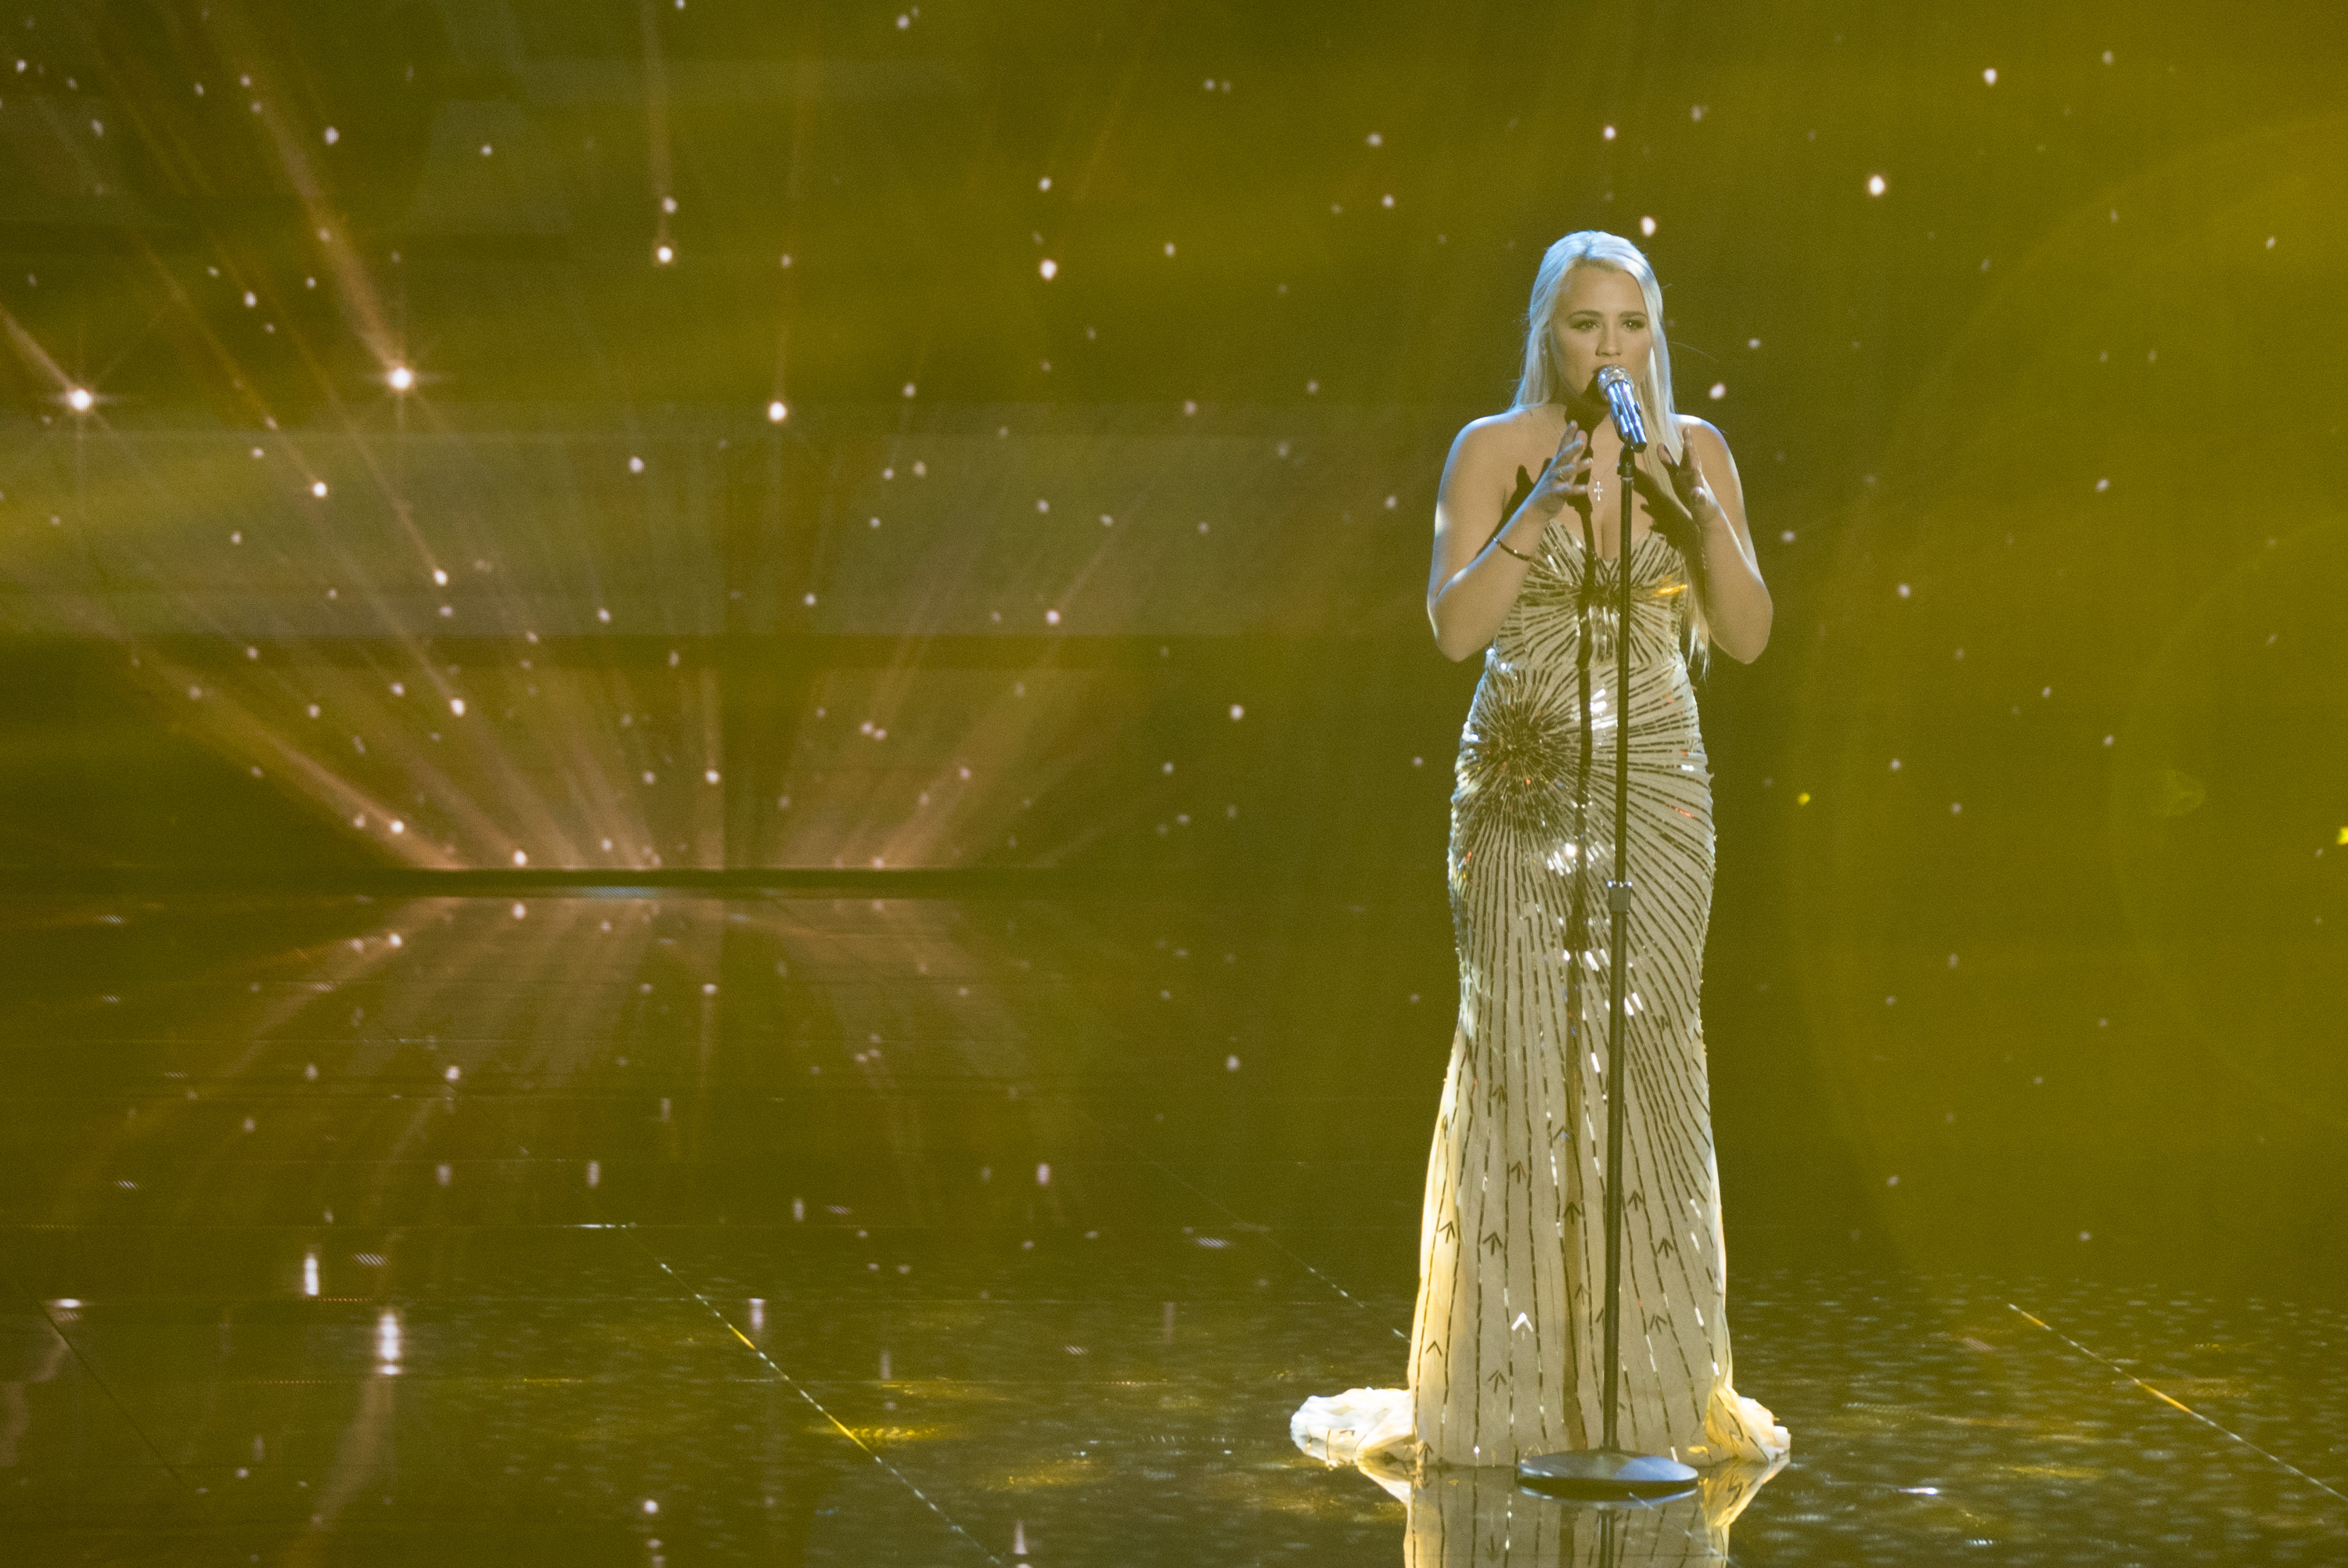 Gabby Barrett on American Idol which aired live on ABC on May 13, 2018.
Photo credit: American Idol
